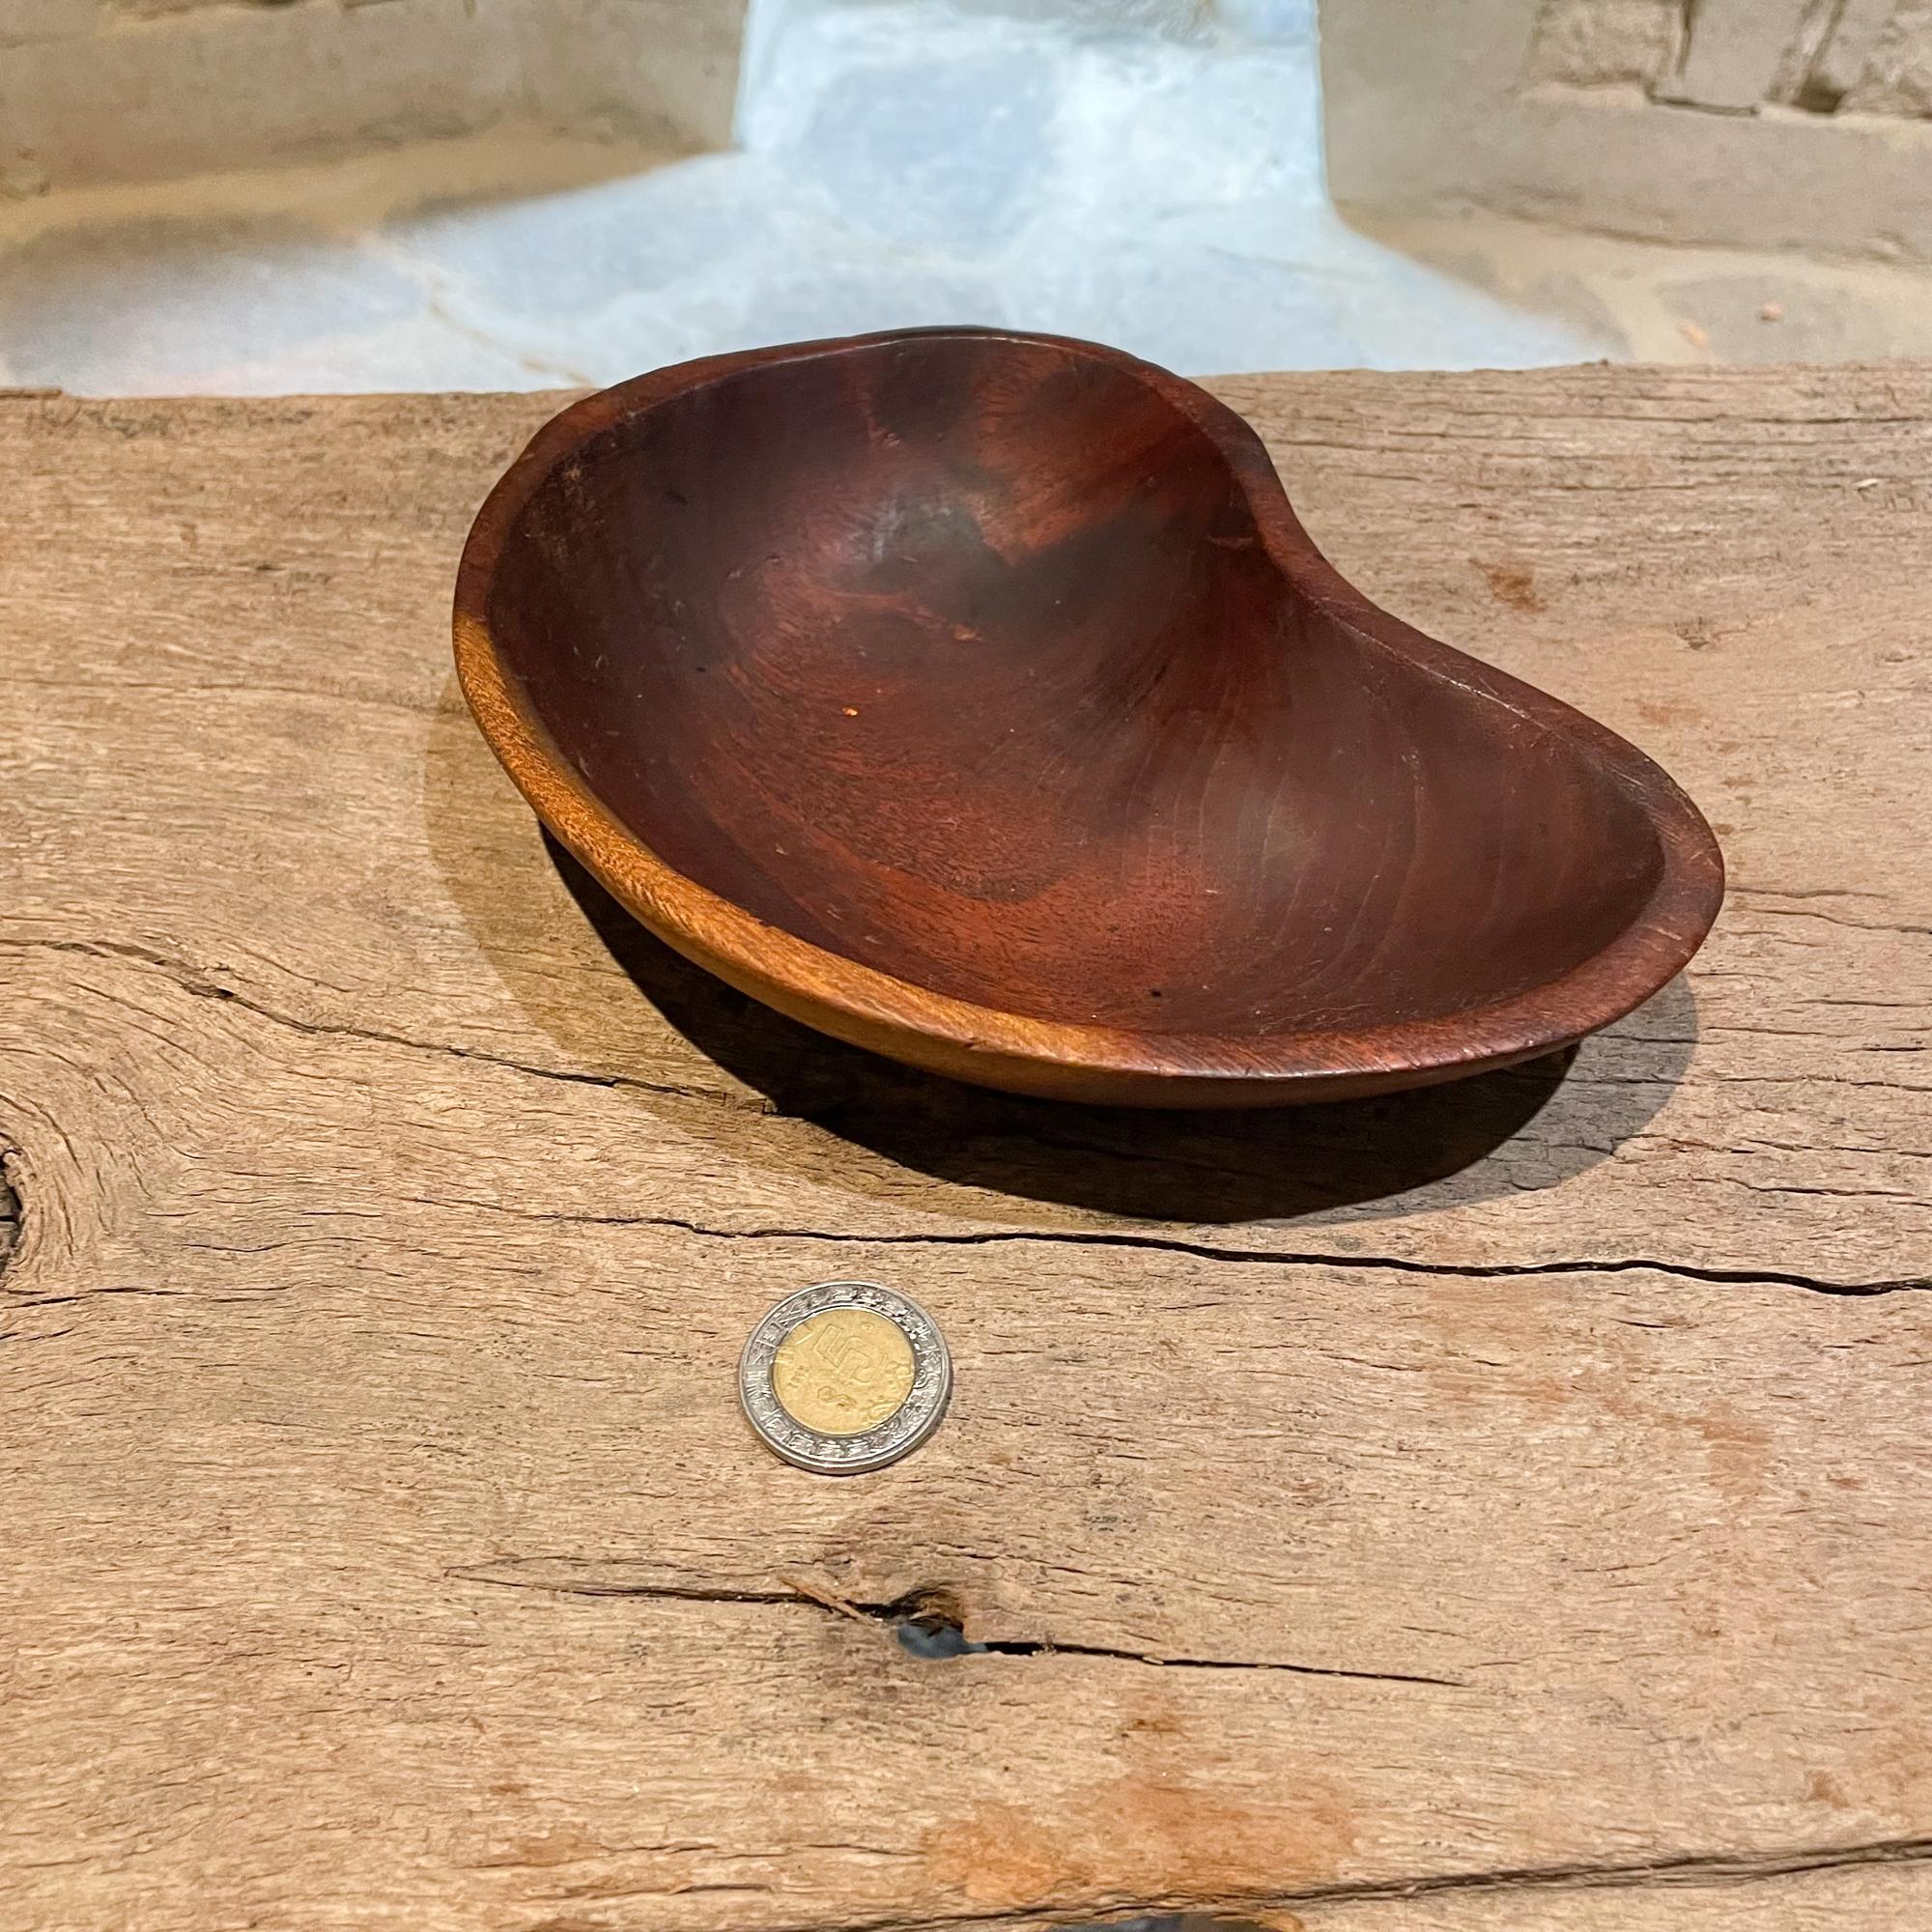 Handmade Biomorphic Wood Bowl Catch it All Modern Don Shoemaker Mexico 1970s In Good Condition For Sale In Chula Vista, CA